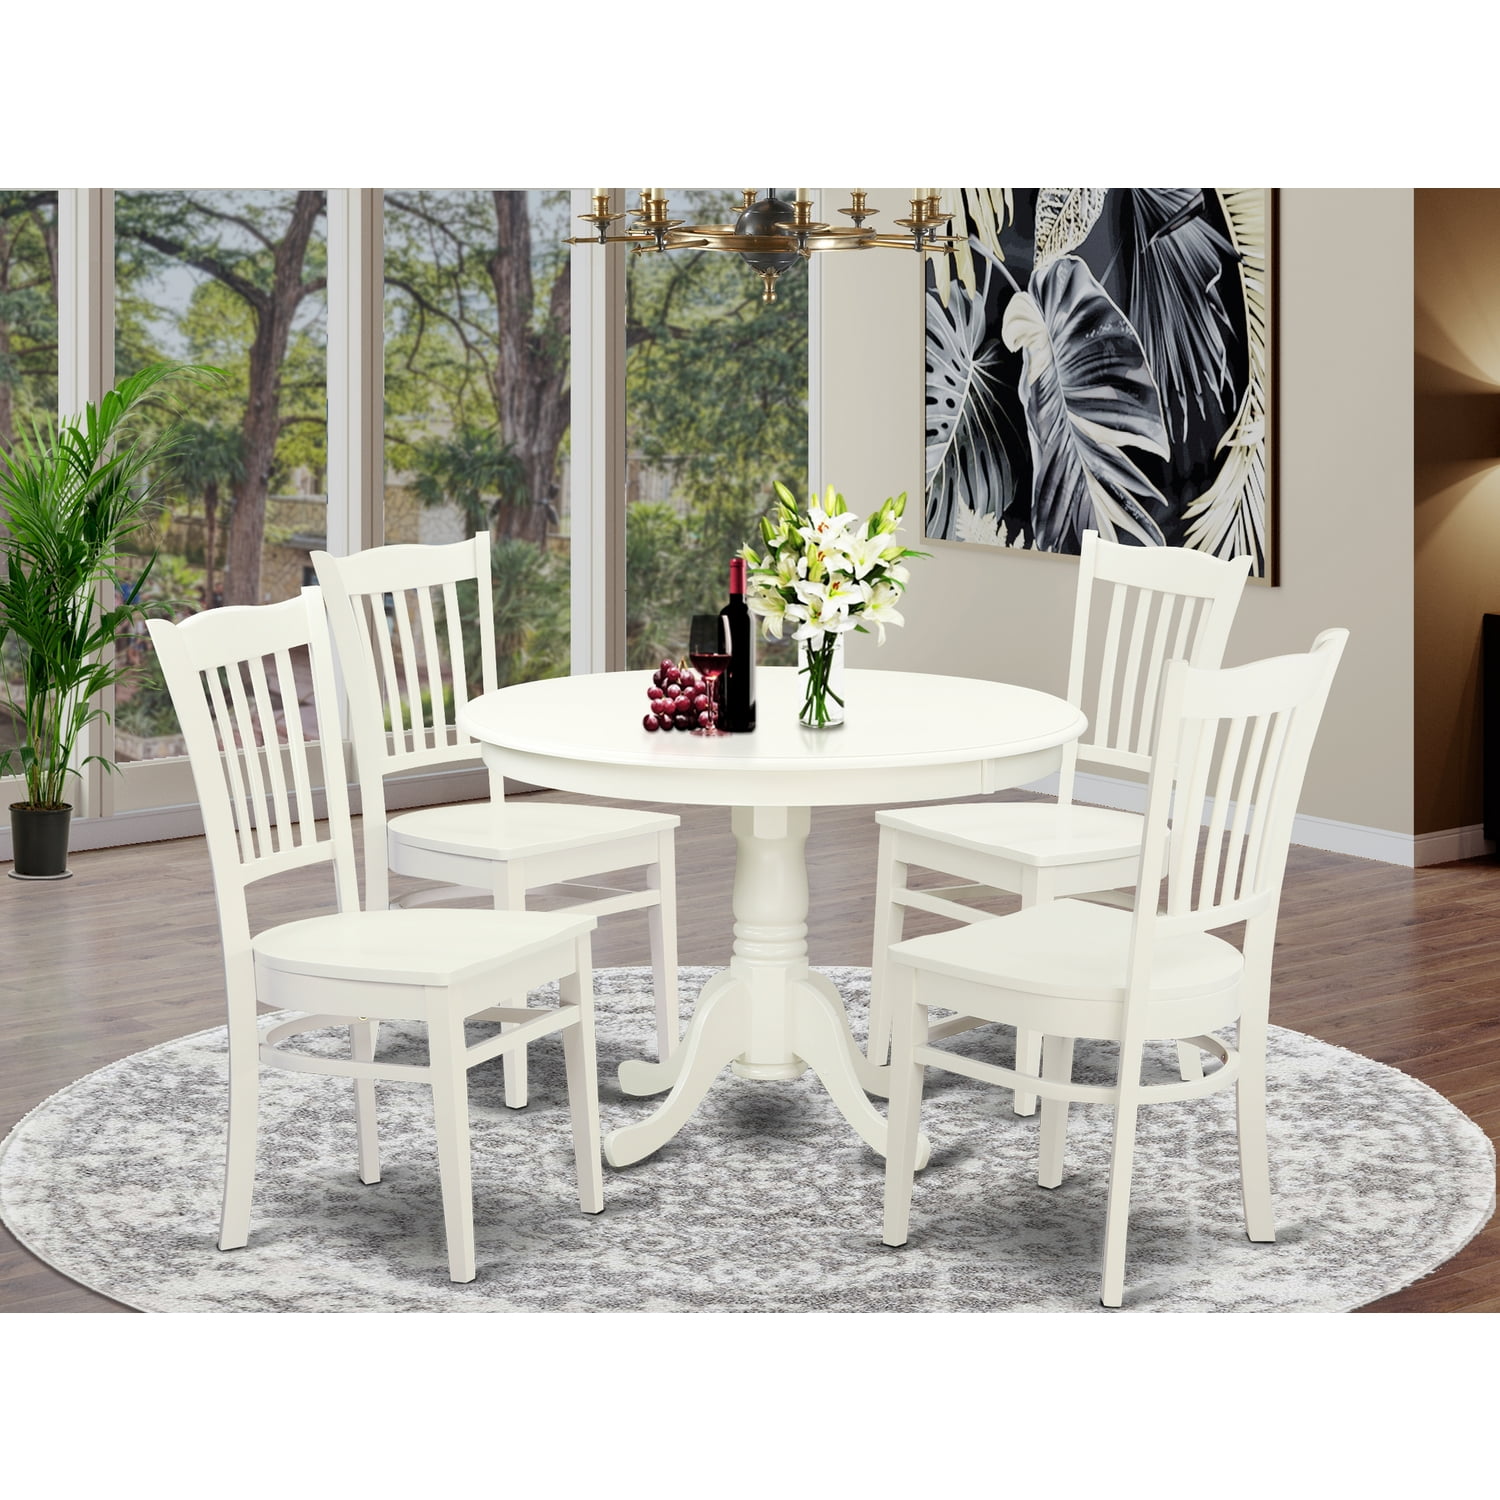 Wood Dinette Chairs Finish Linen White, Circle Dining Table And Chairs Set